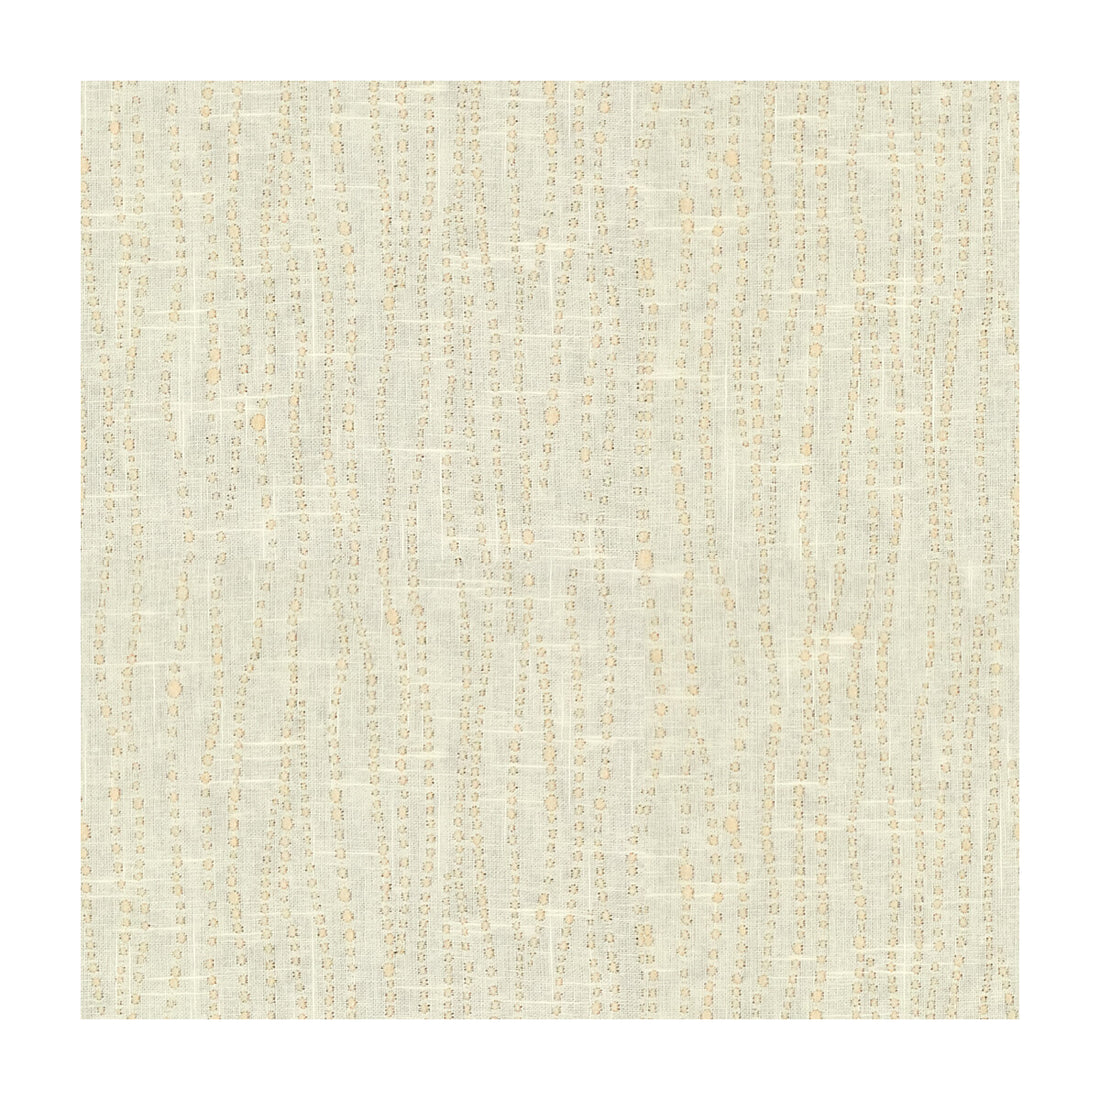 Denali fabric in shell color - pattern 4192.16.0 - by Kravet Design in the Candice Olson collection